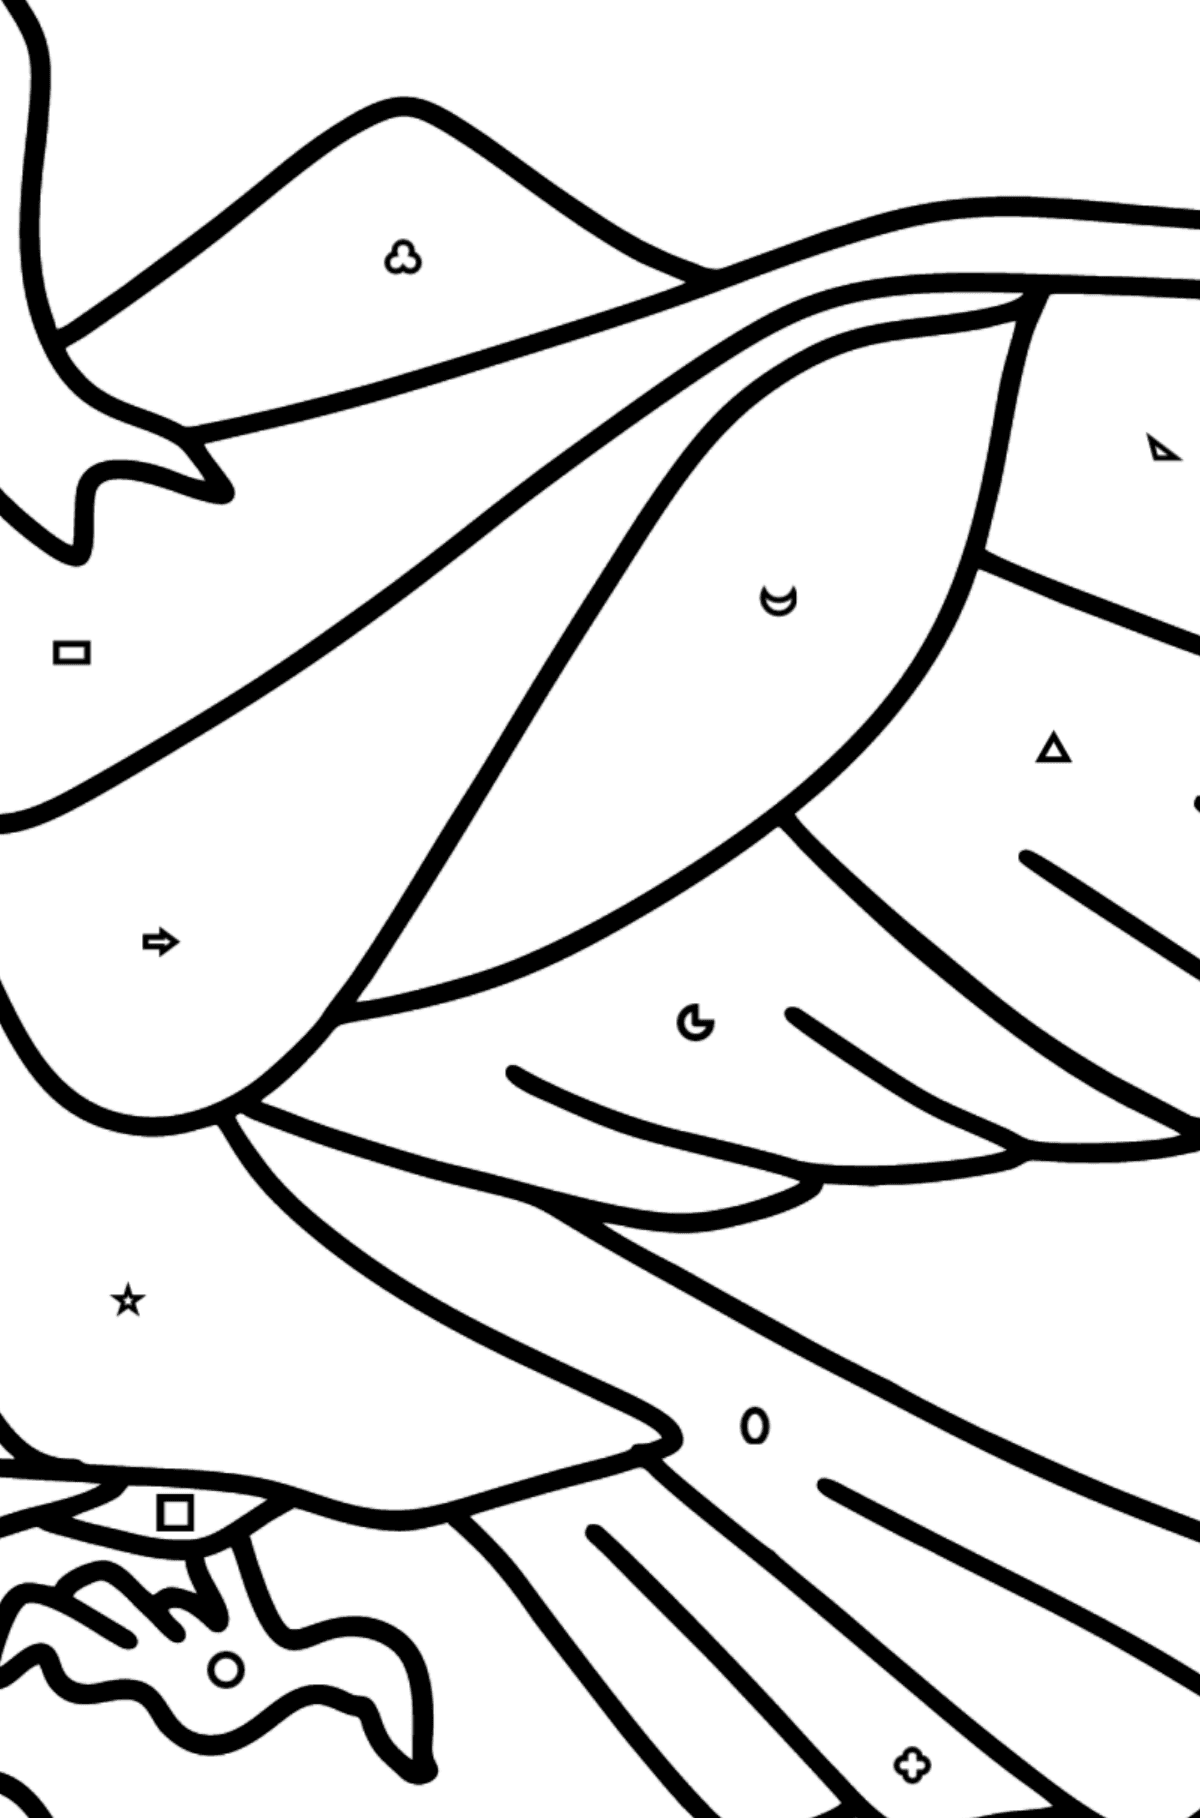 Beautiful Eagle coloring page - Coloring by Geometric Shapes for Kids